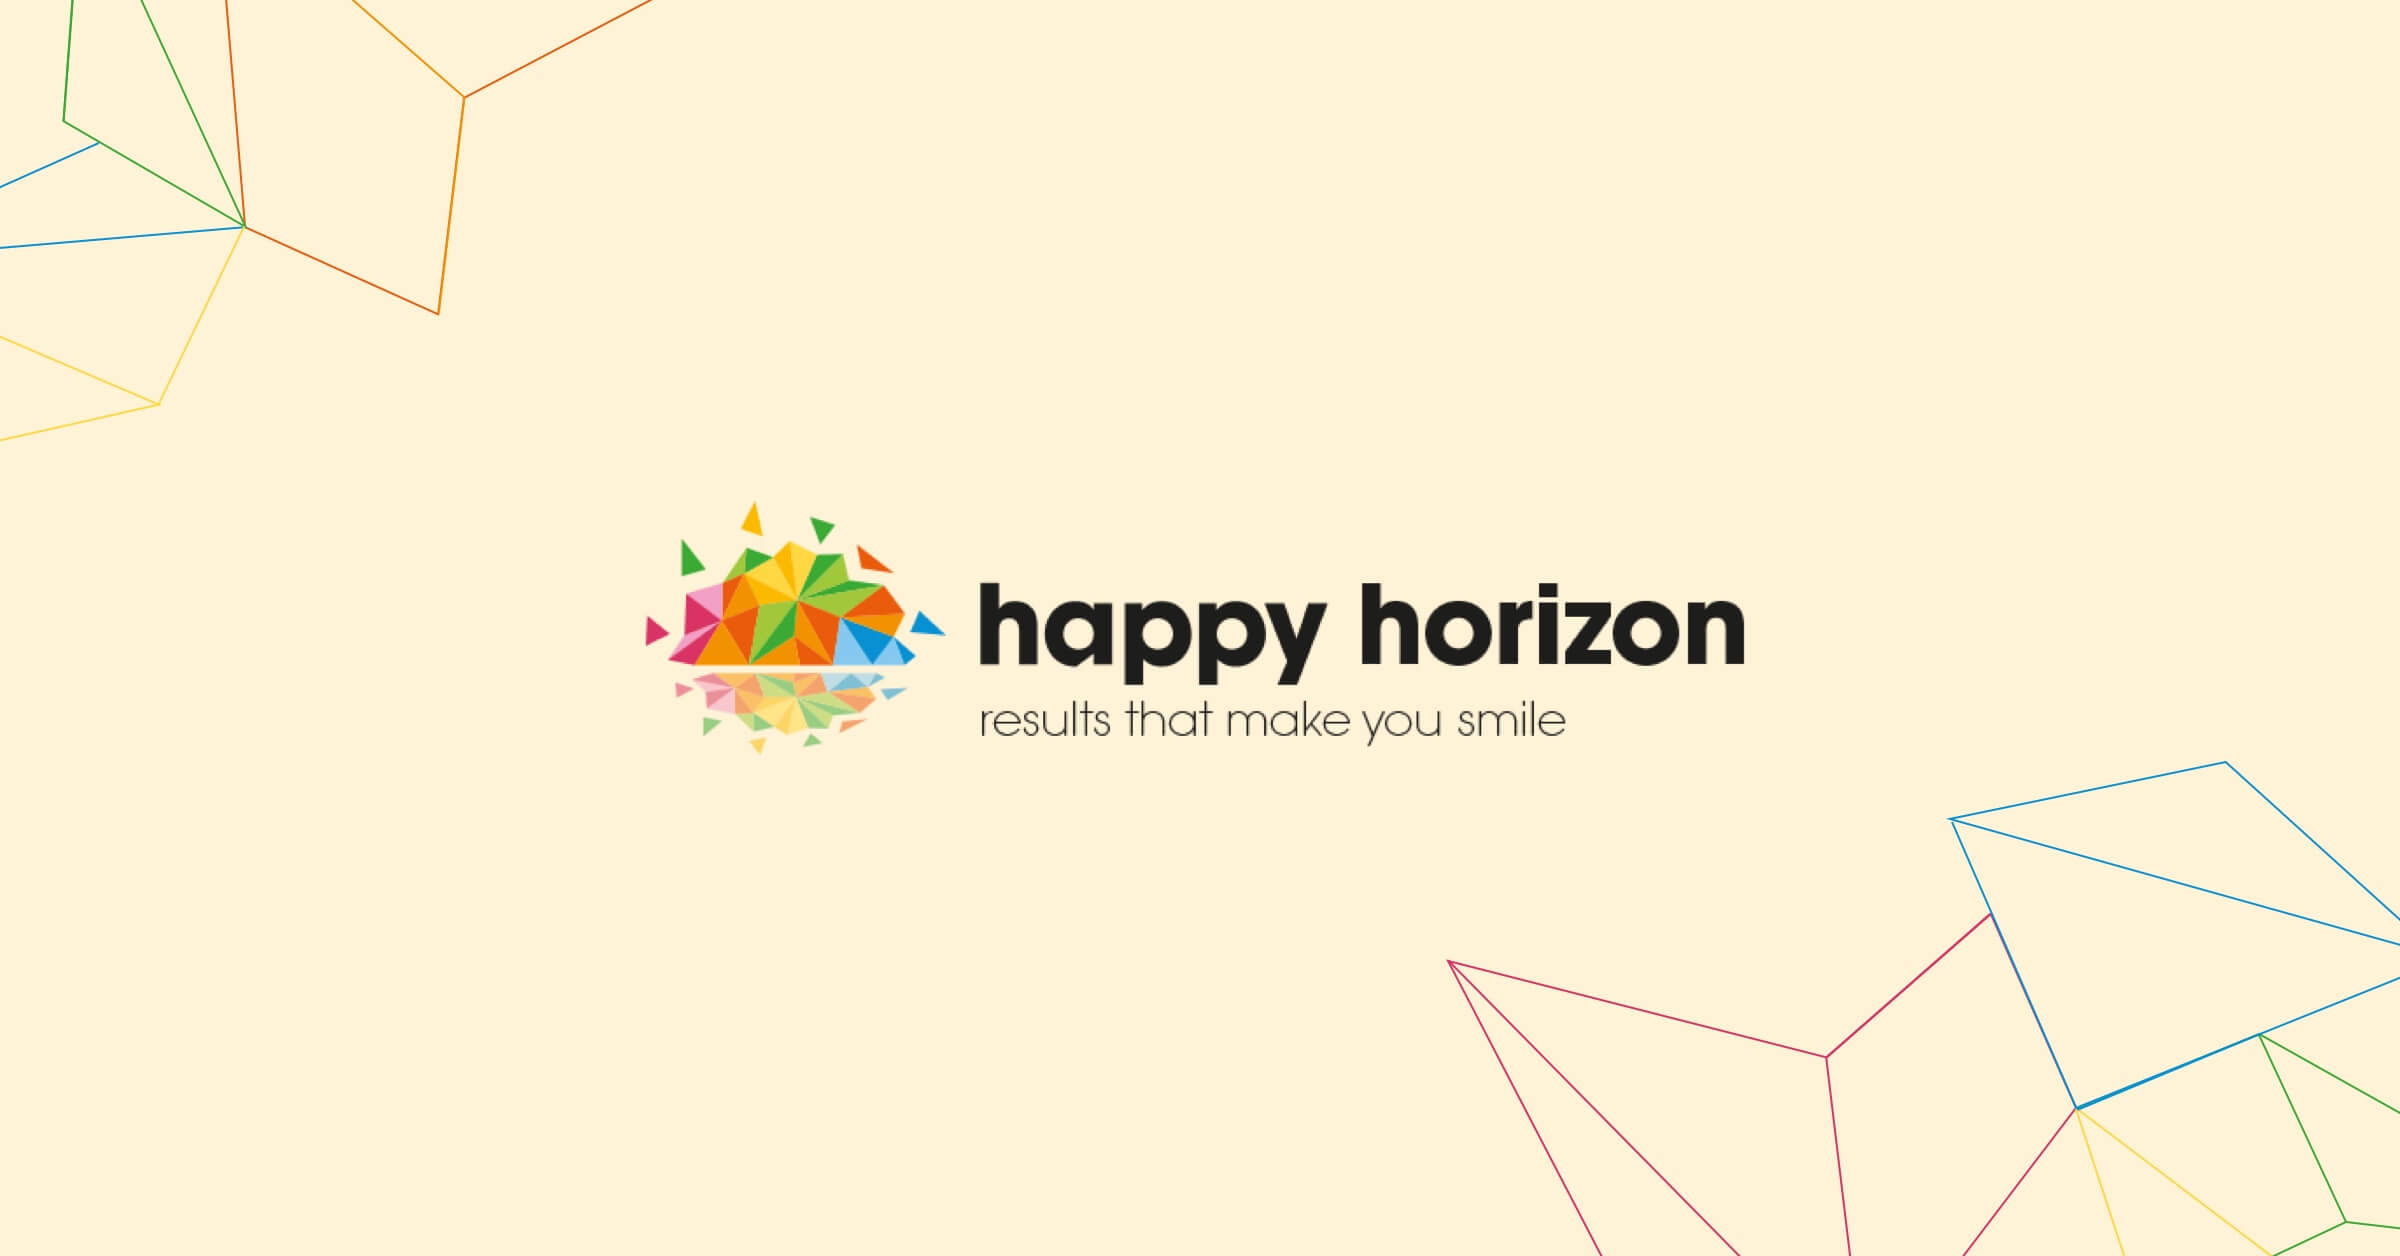 Happy Horizon uses Happeo for smooth mergers and acquisitions